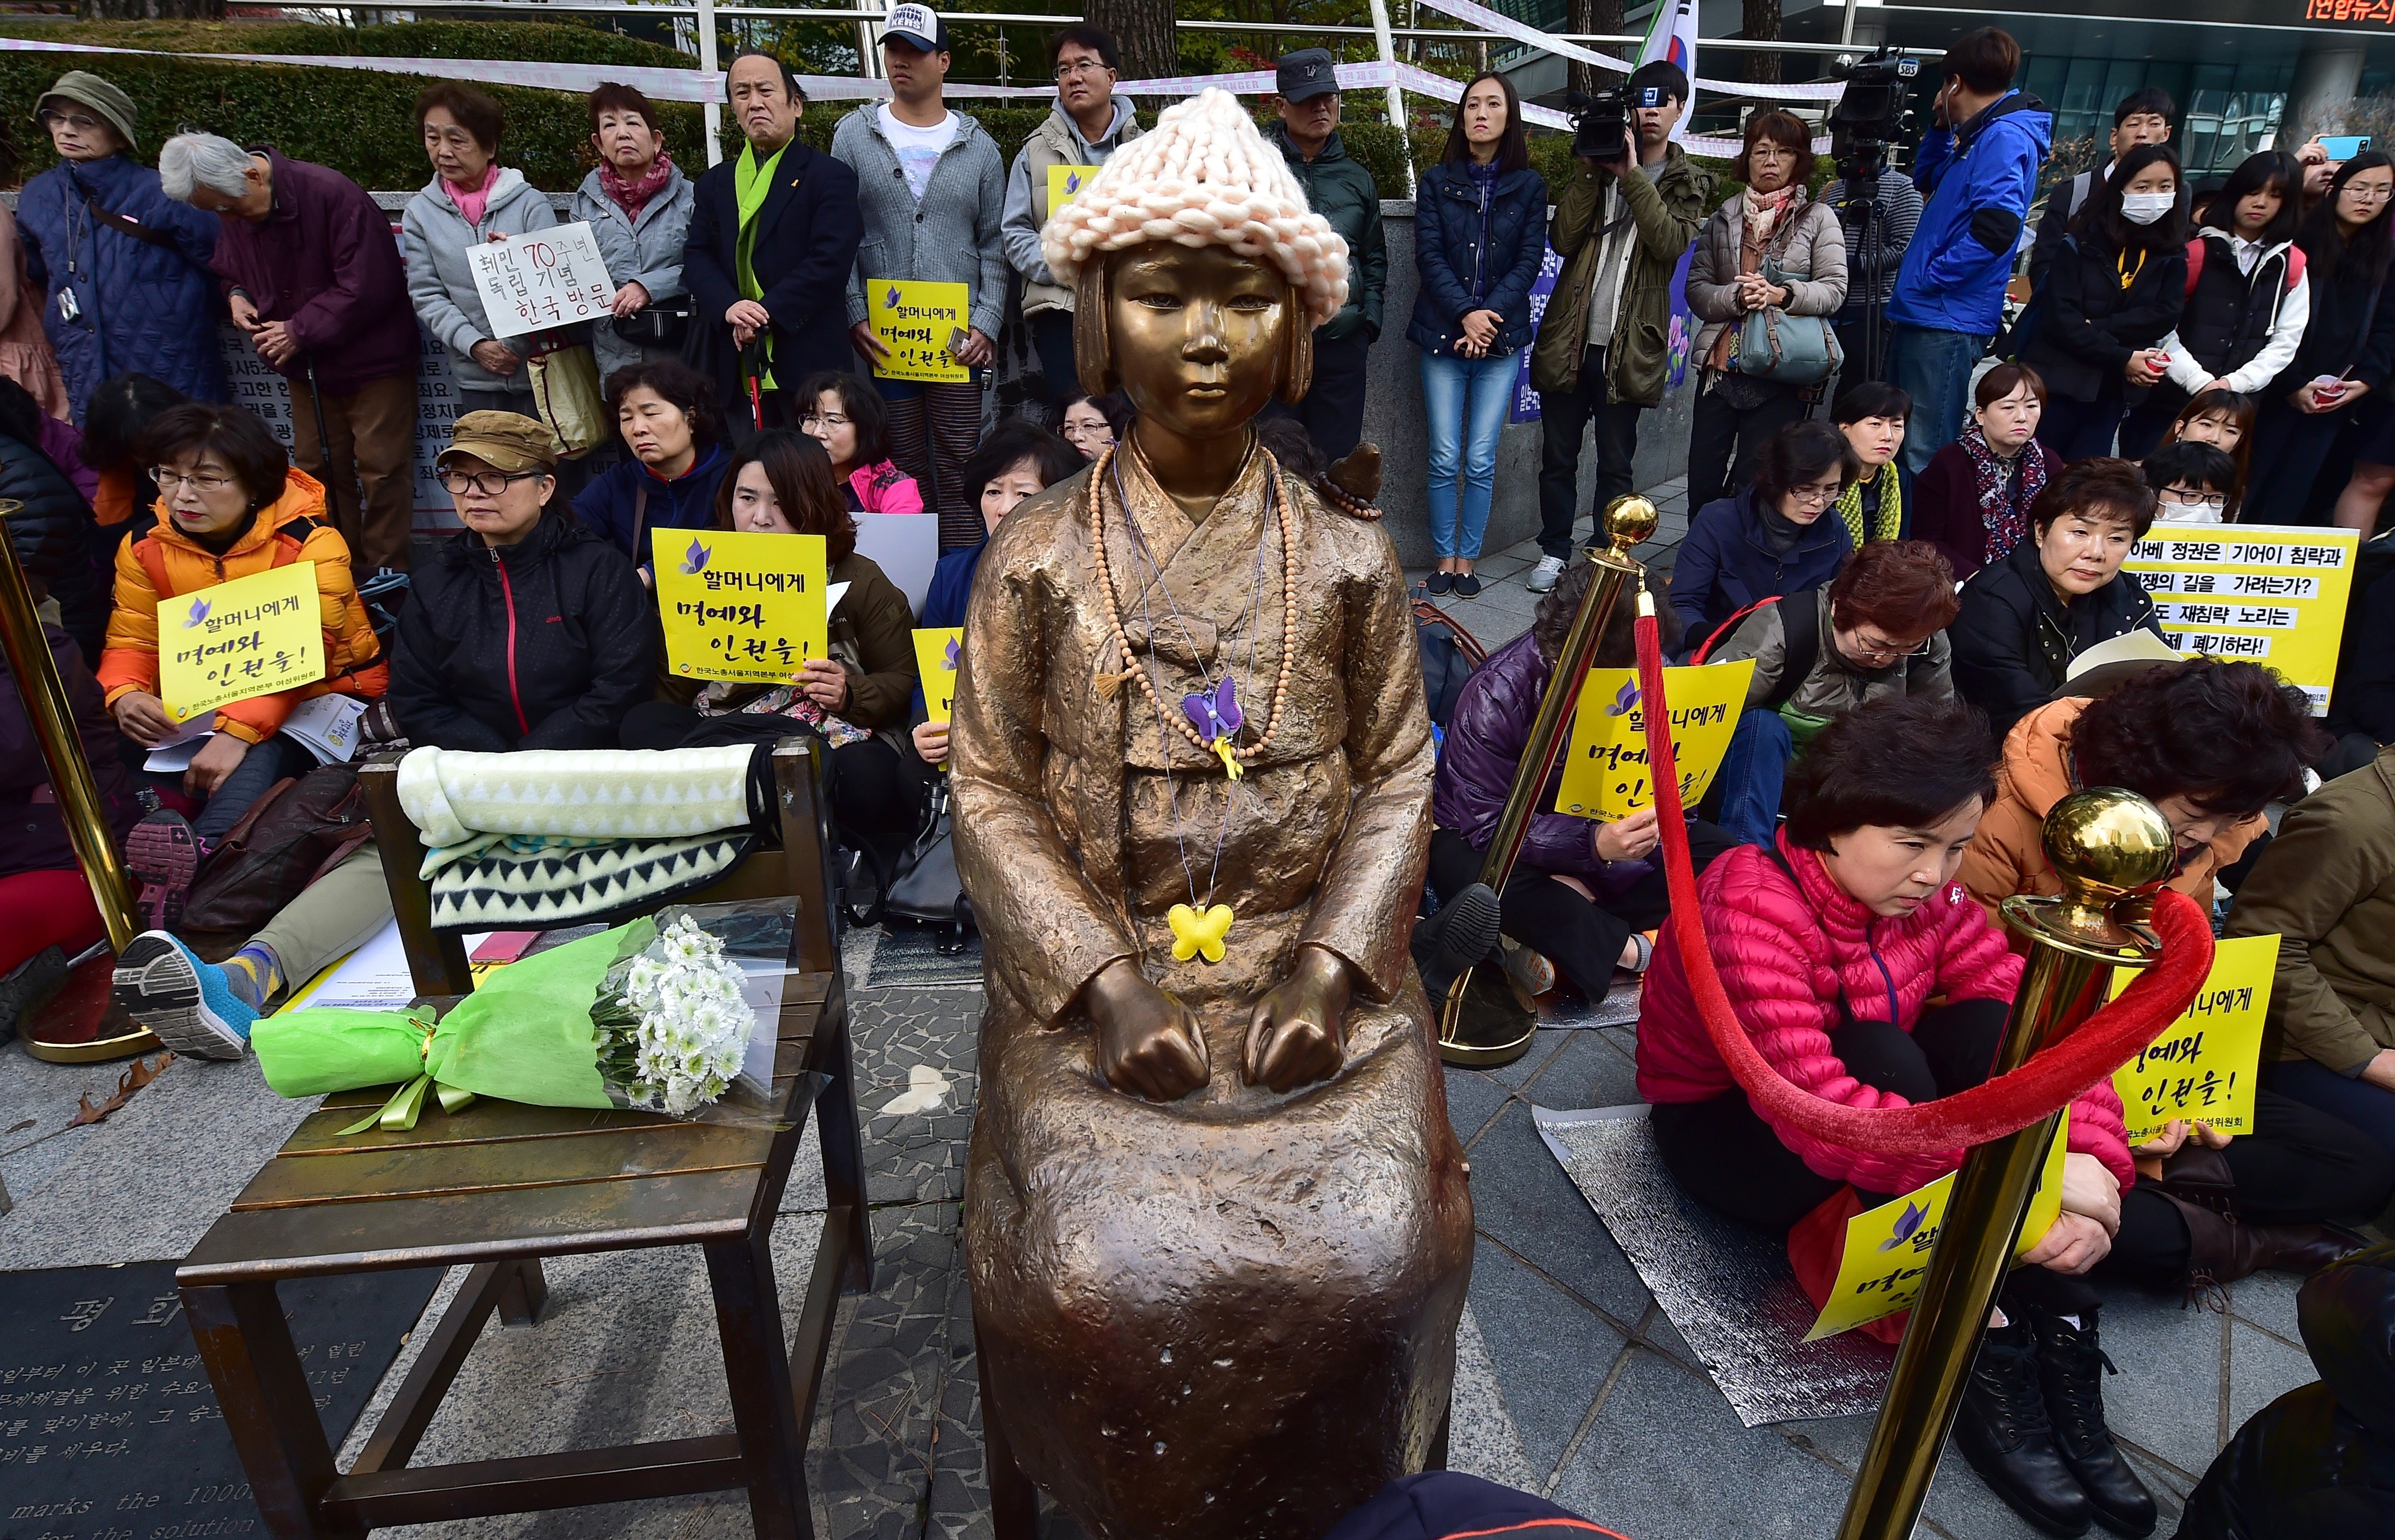 Protesters sit next to a statue of a South Korean teenage girl, center, during a weekly anti-Japanese demonstration near the Japanese embassy in Seoul on Nov. 11, 2015 (Jung Yeon-Je—AFP/Getty Images)